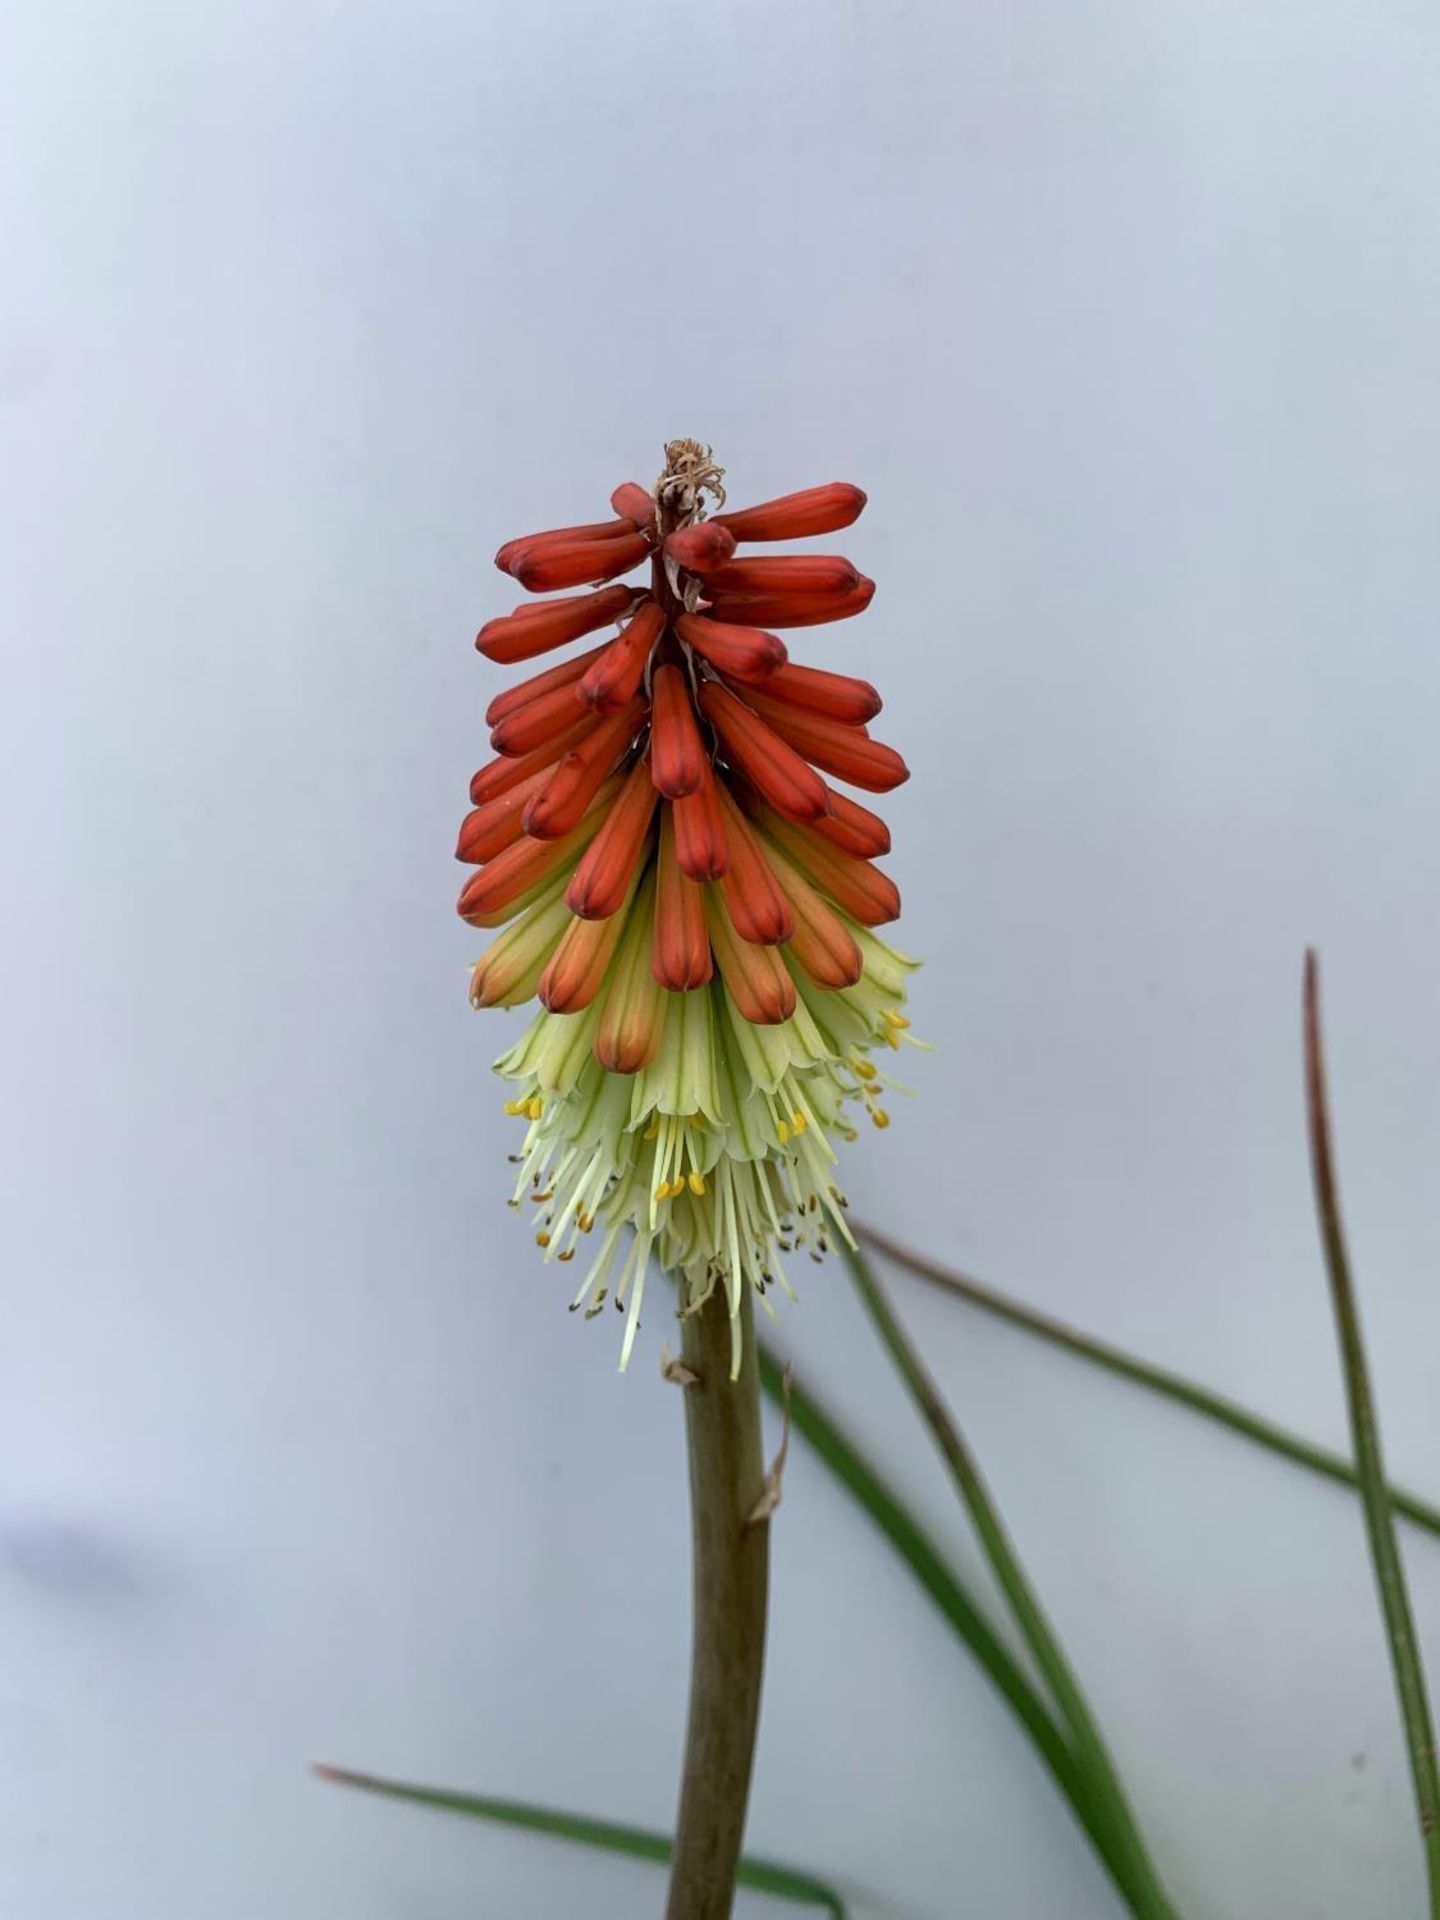 FOUR KNIPHOFIA RED HOT POKER 'FLAMENCO' IN 2 LTR POTS APPROX 70CM IN HEIGHT PLUS VAT TO BE SOLD - Image 8 of 8